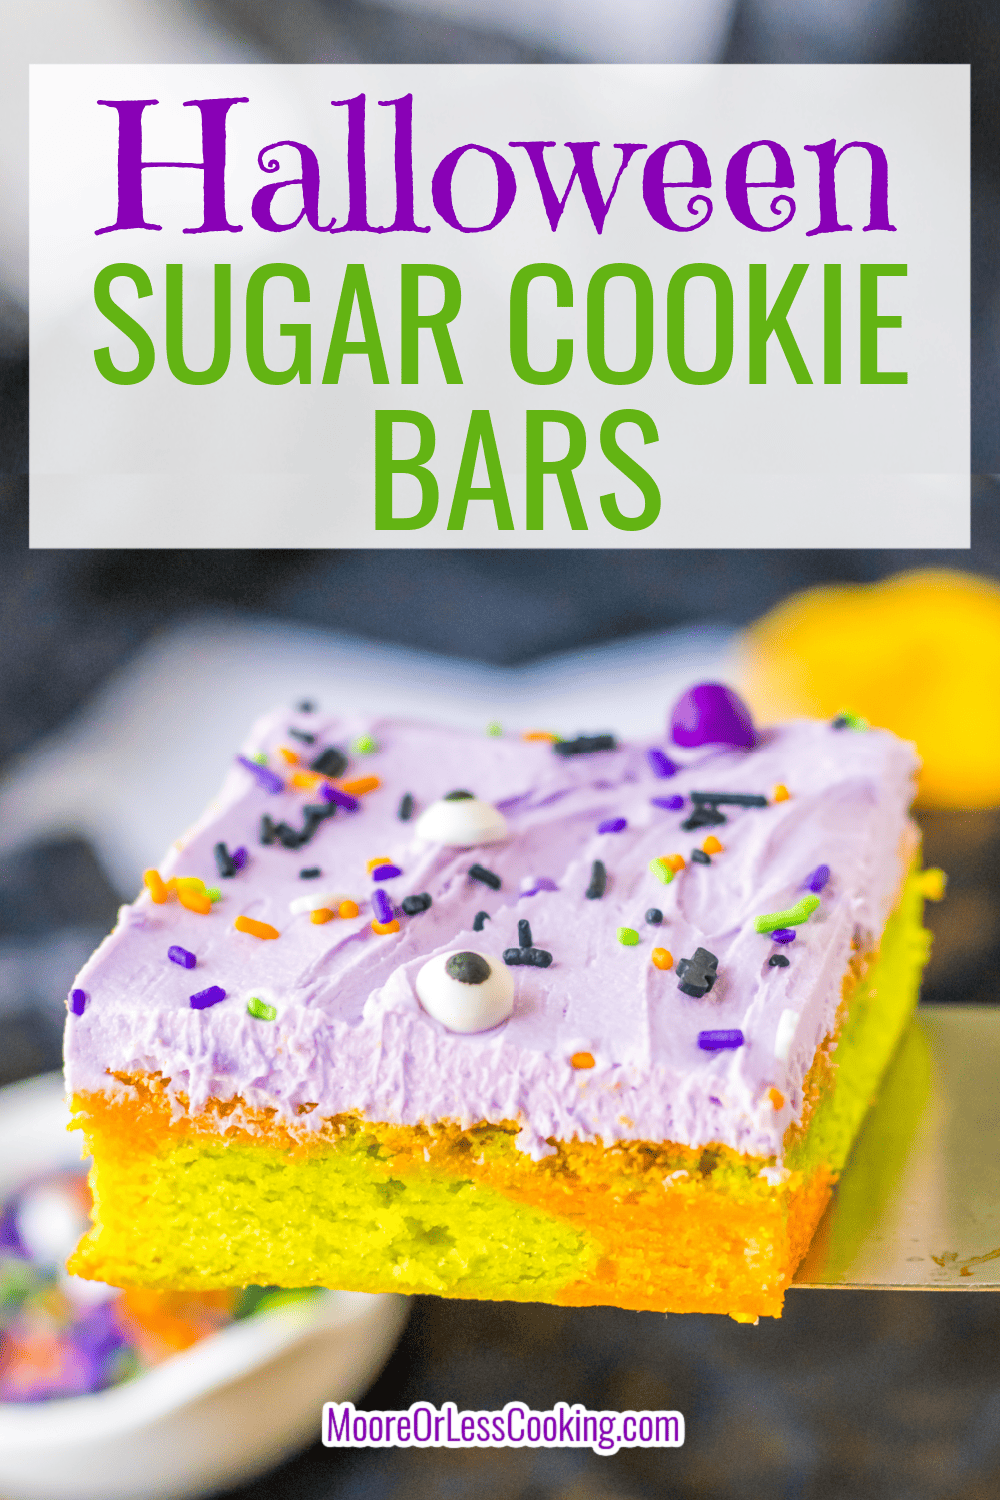 Halloween Sugar Cookie Bars are a colorful spooky treat! Thick chewy marbled sugar cookie bars are flavored with vanilla and a touch of almond extract. Topped with a purple buttercream, and topped with colorful spooky sprinkles. Always a hit at any Halloween get together. via @Mooreorlesscook